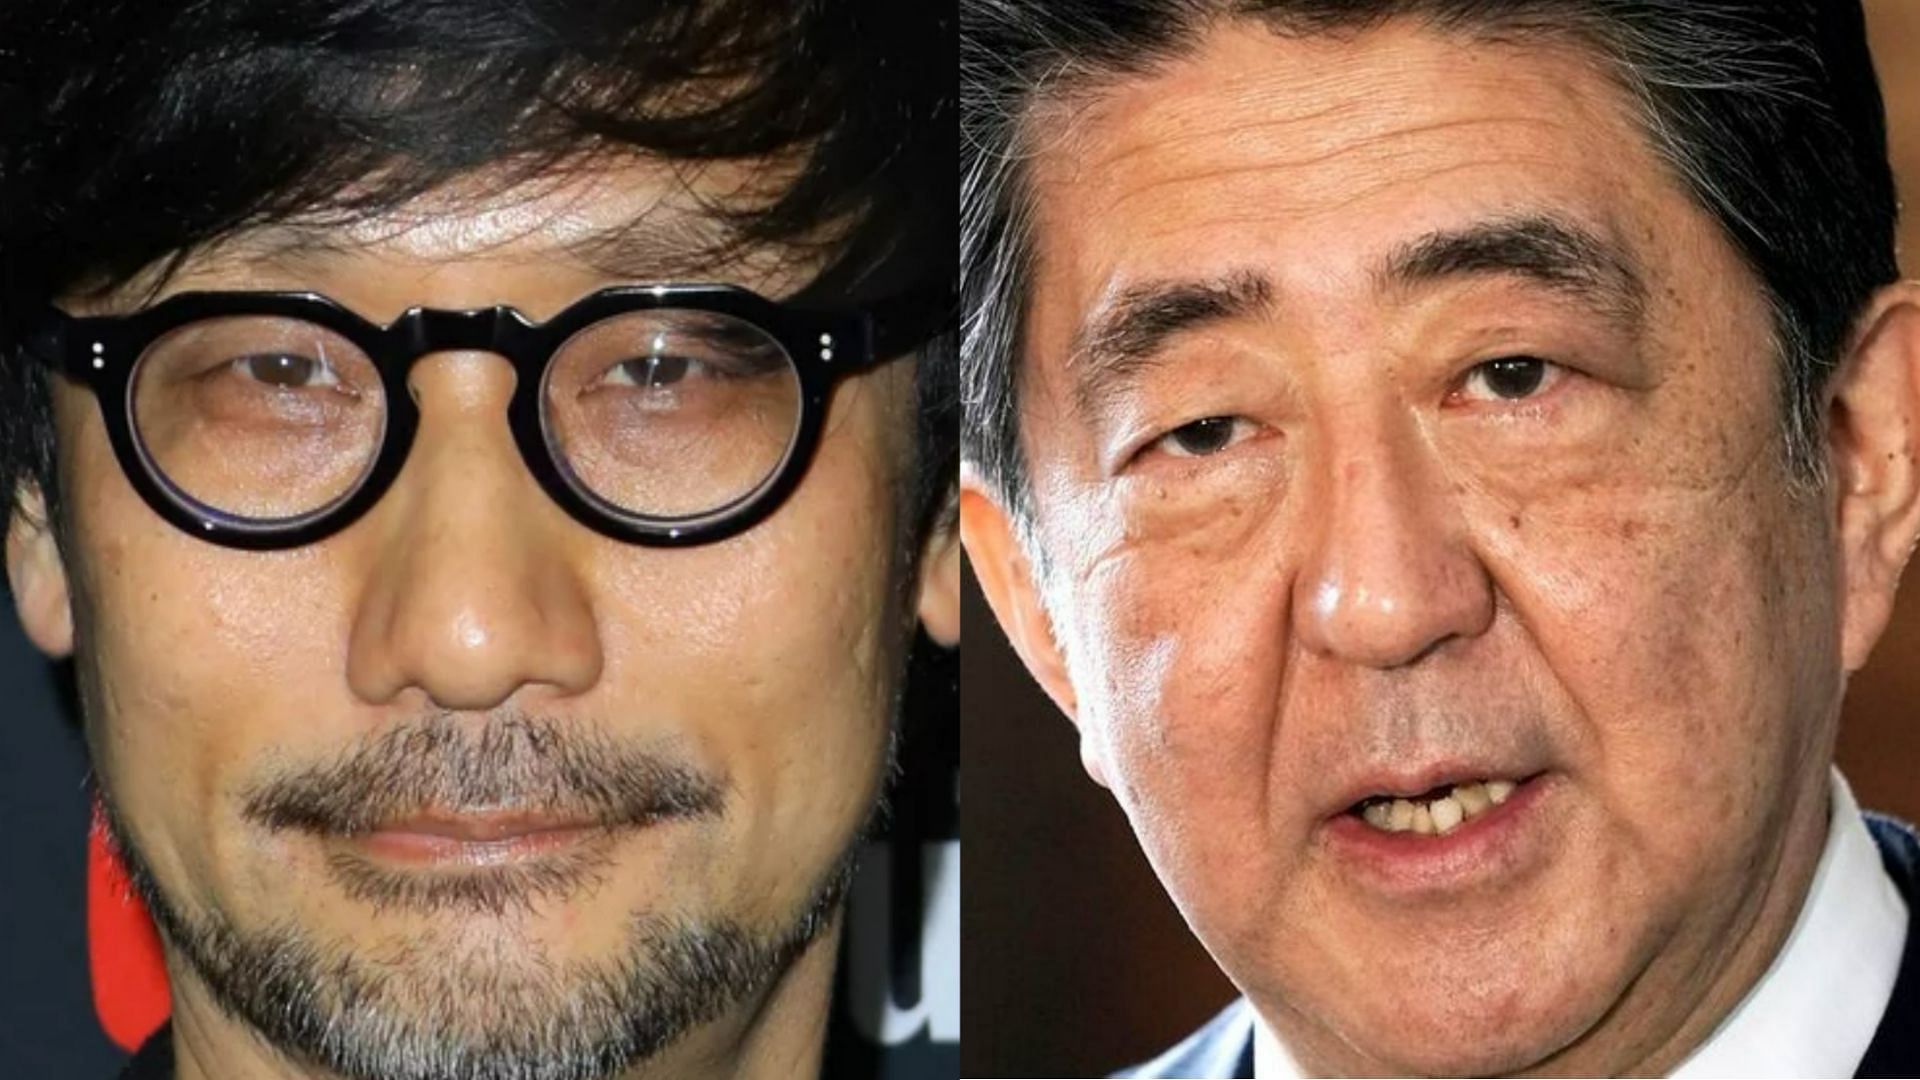 Hideo Kojima wrongly accused of killing former Japanese PM Shinzo Abe (Image via Getty Images and AP)